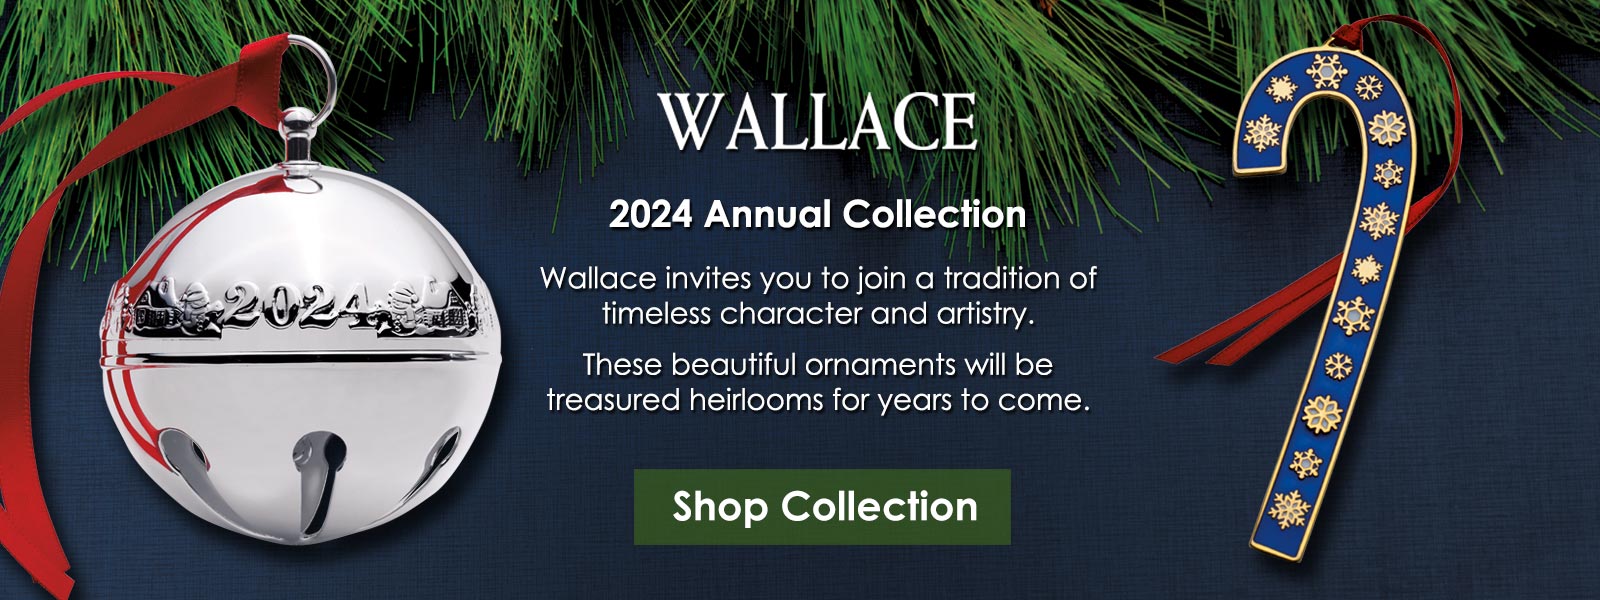 2024 Wallace Collection